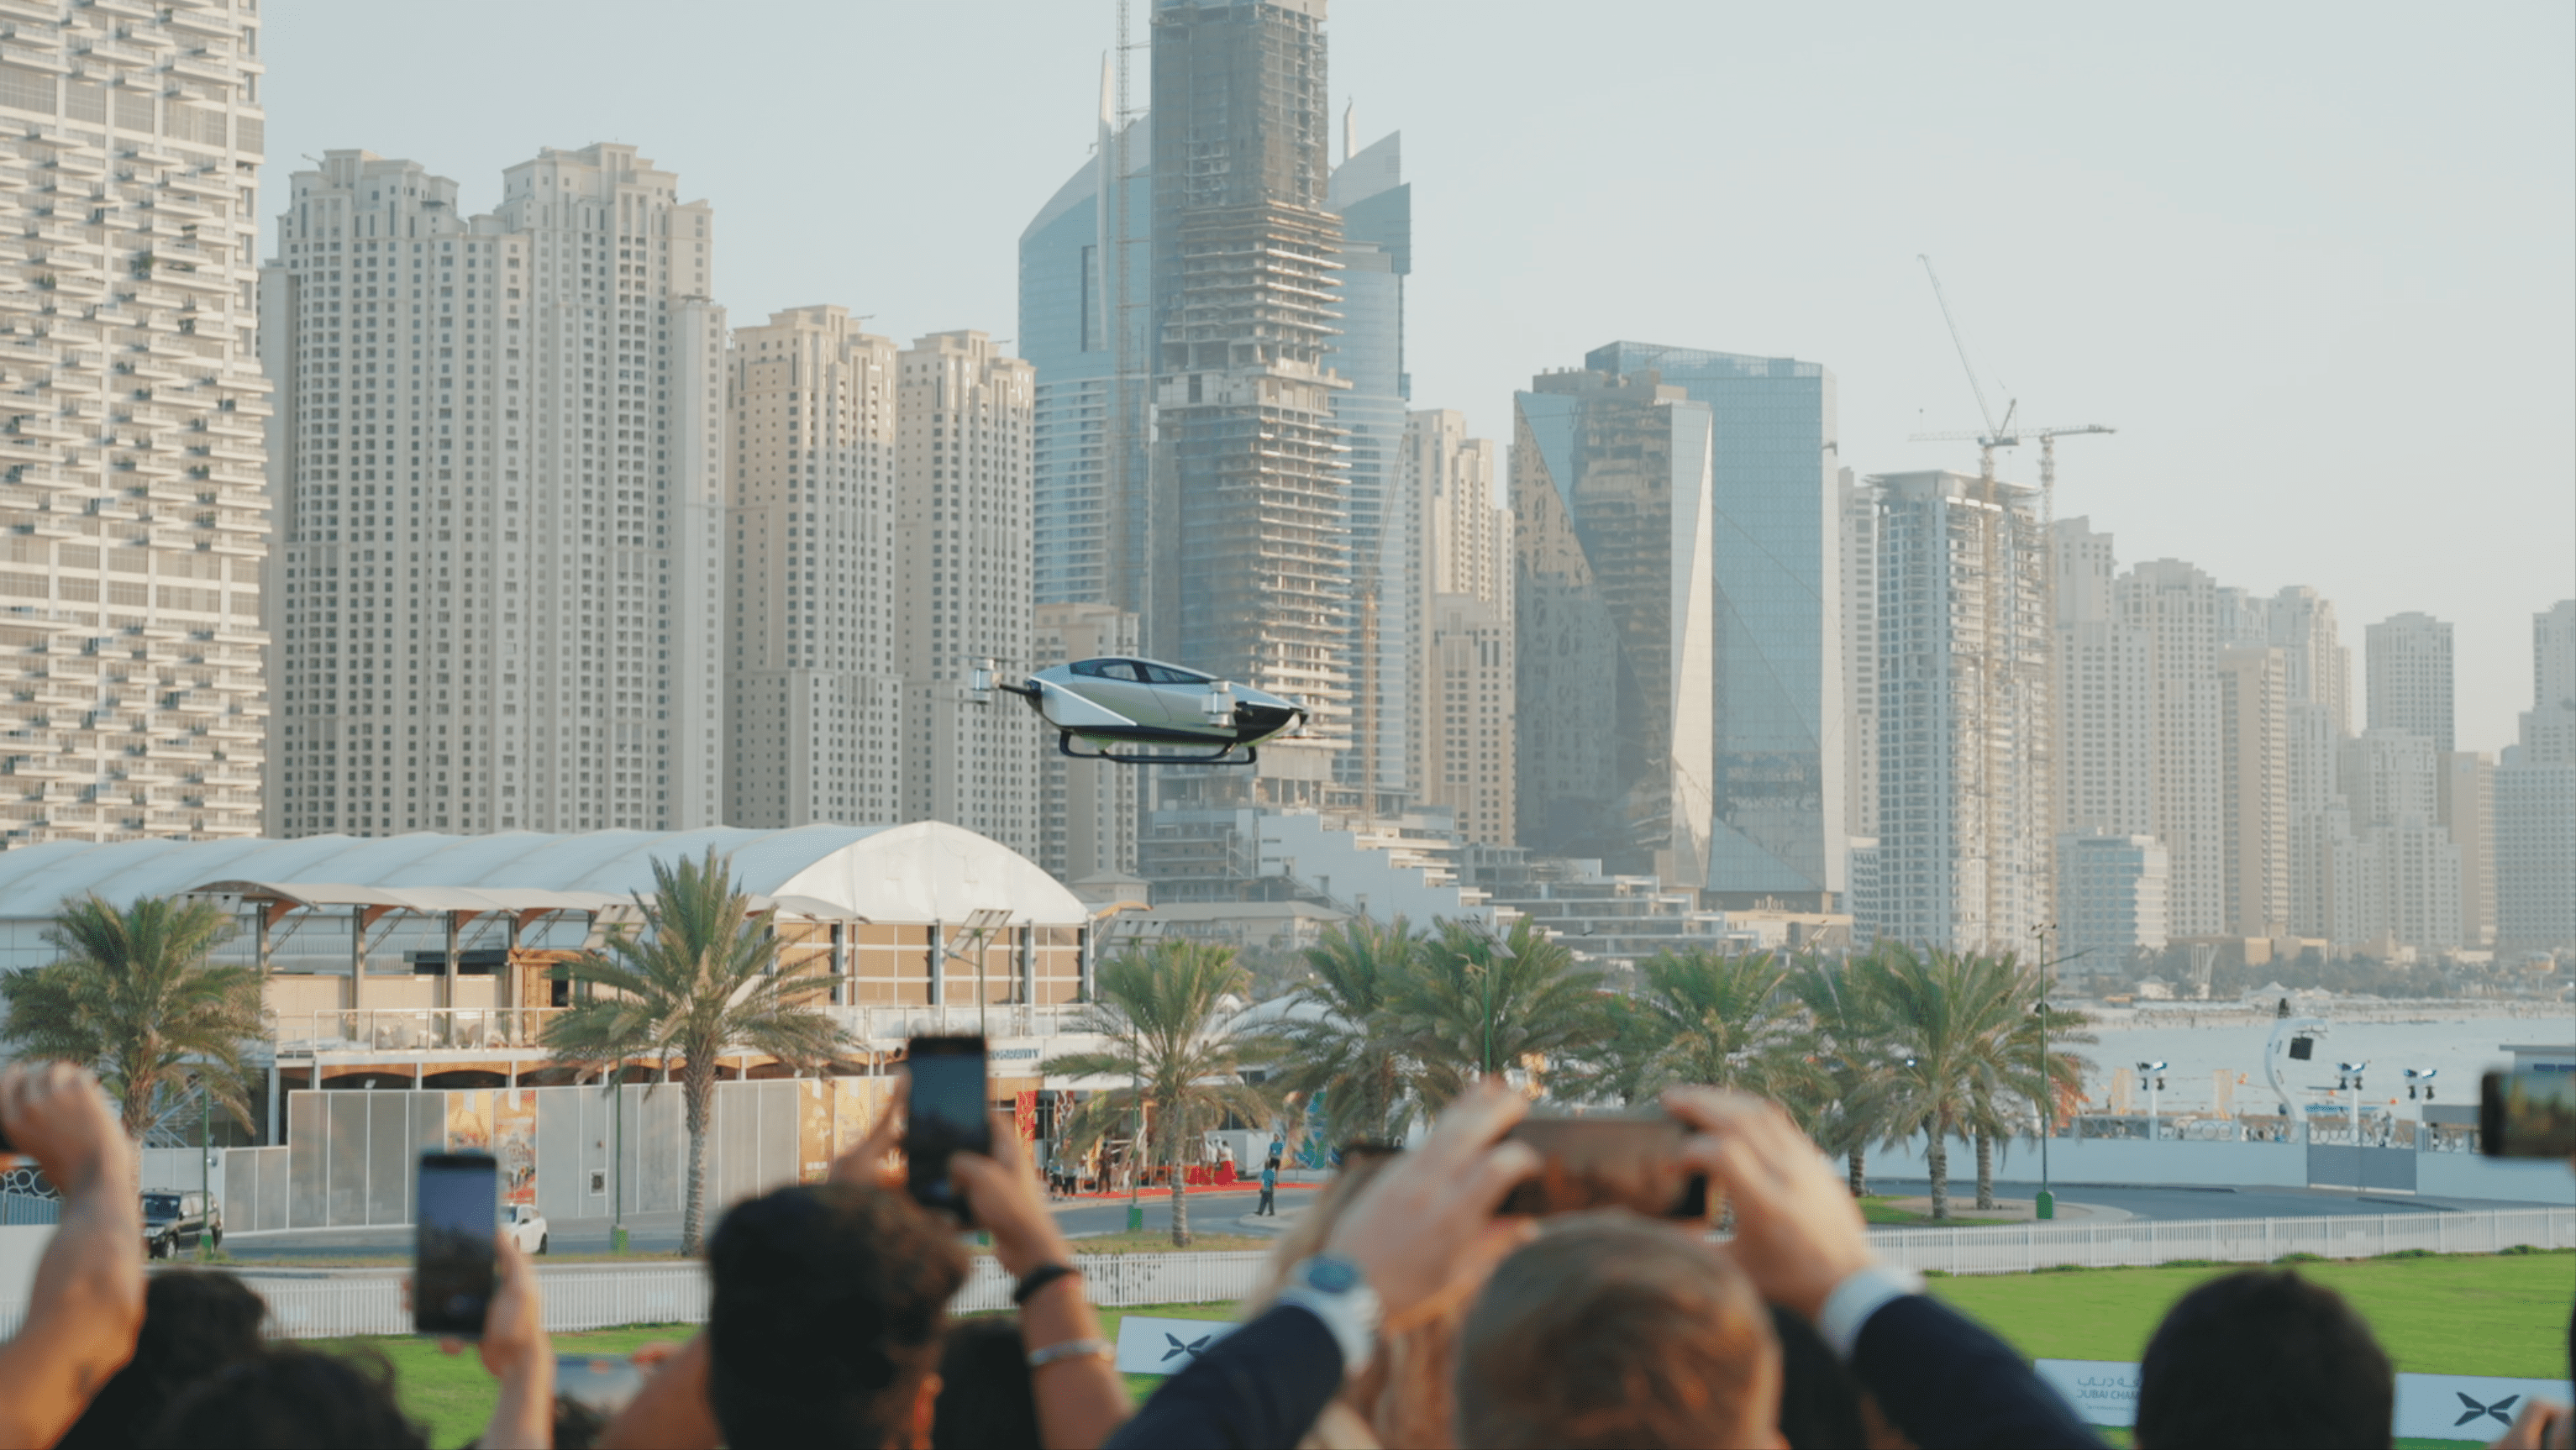 Rome and Dubai Host eVTOL Demo Flights, One With Pilot On Board